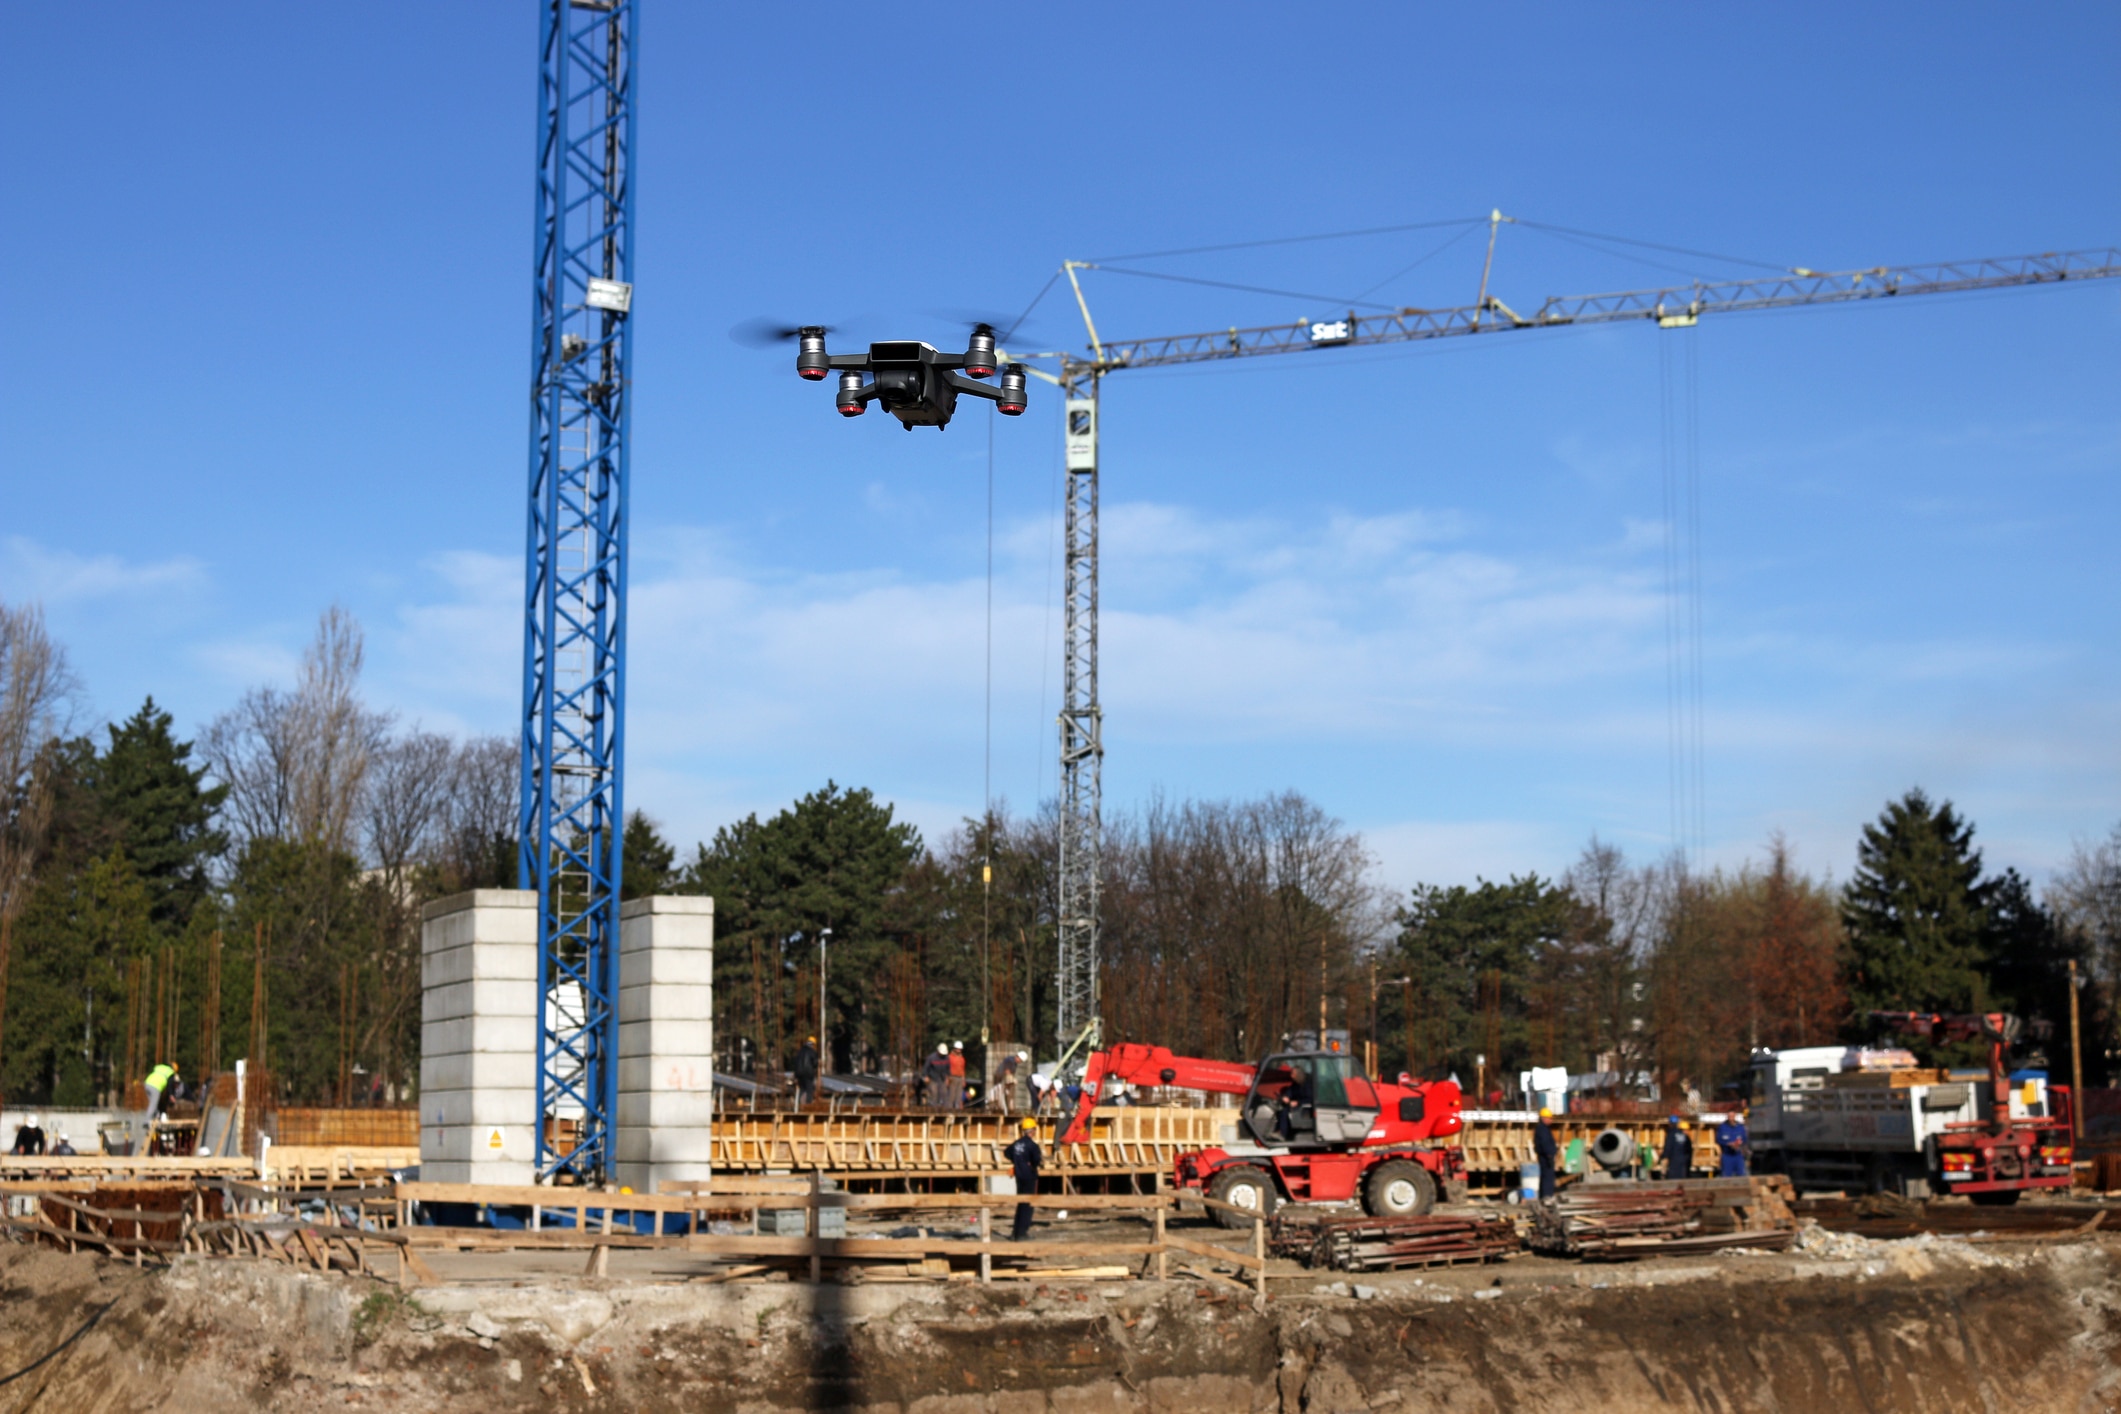 Construction drones: 7 ways to mitigate risk before you fly